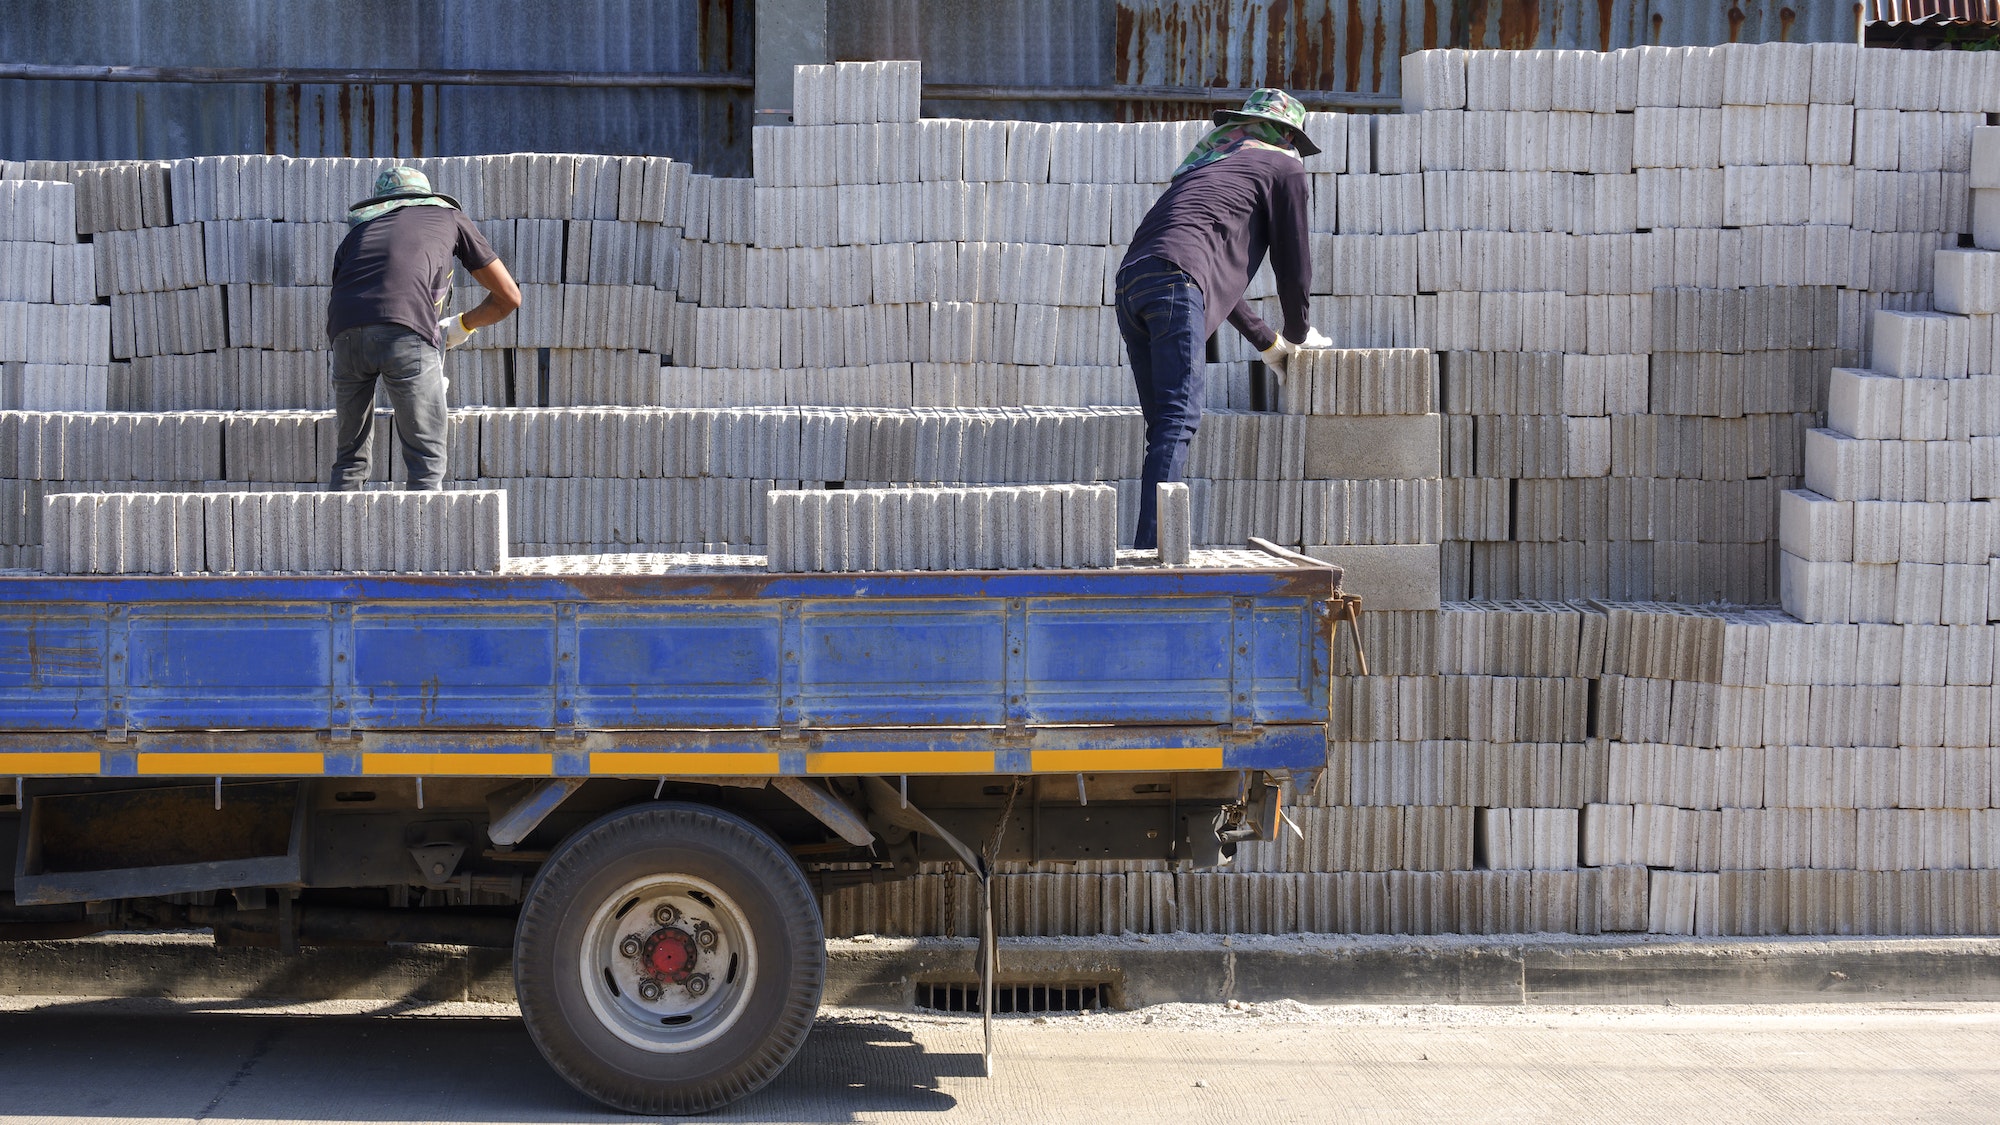 Rear view of 2 Asian workers are loading concrete blocks into the truck for delivery to customers